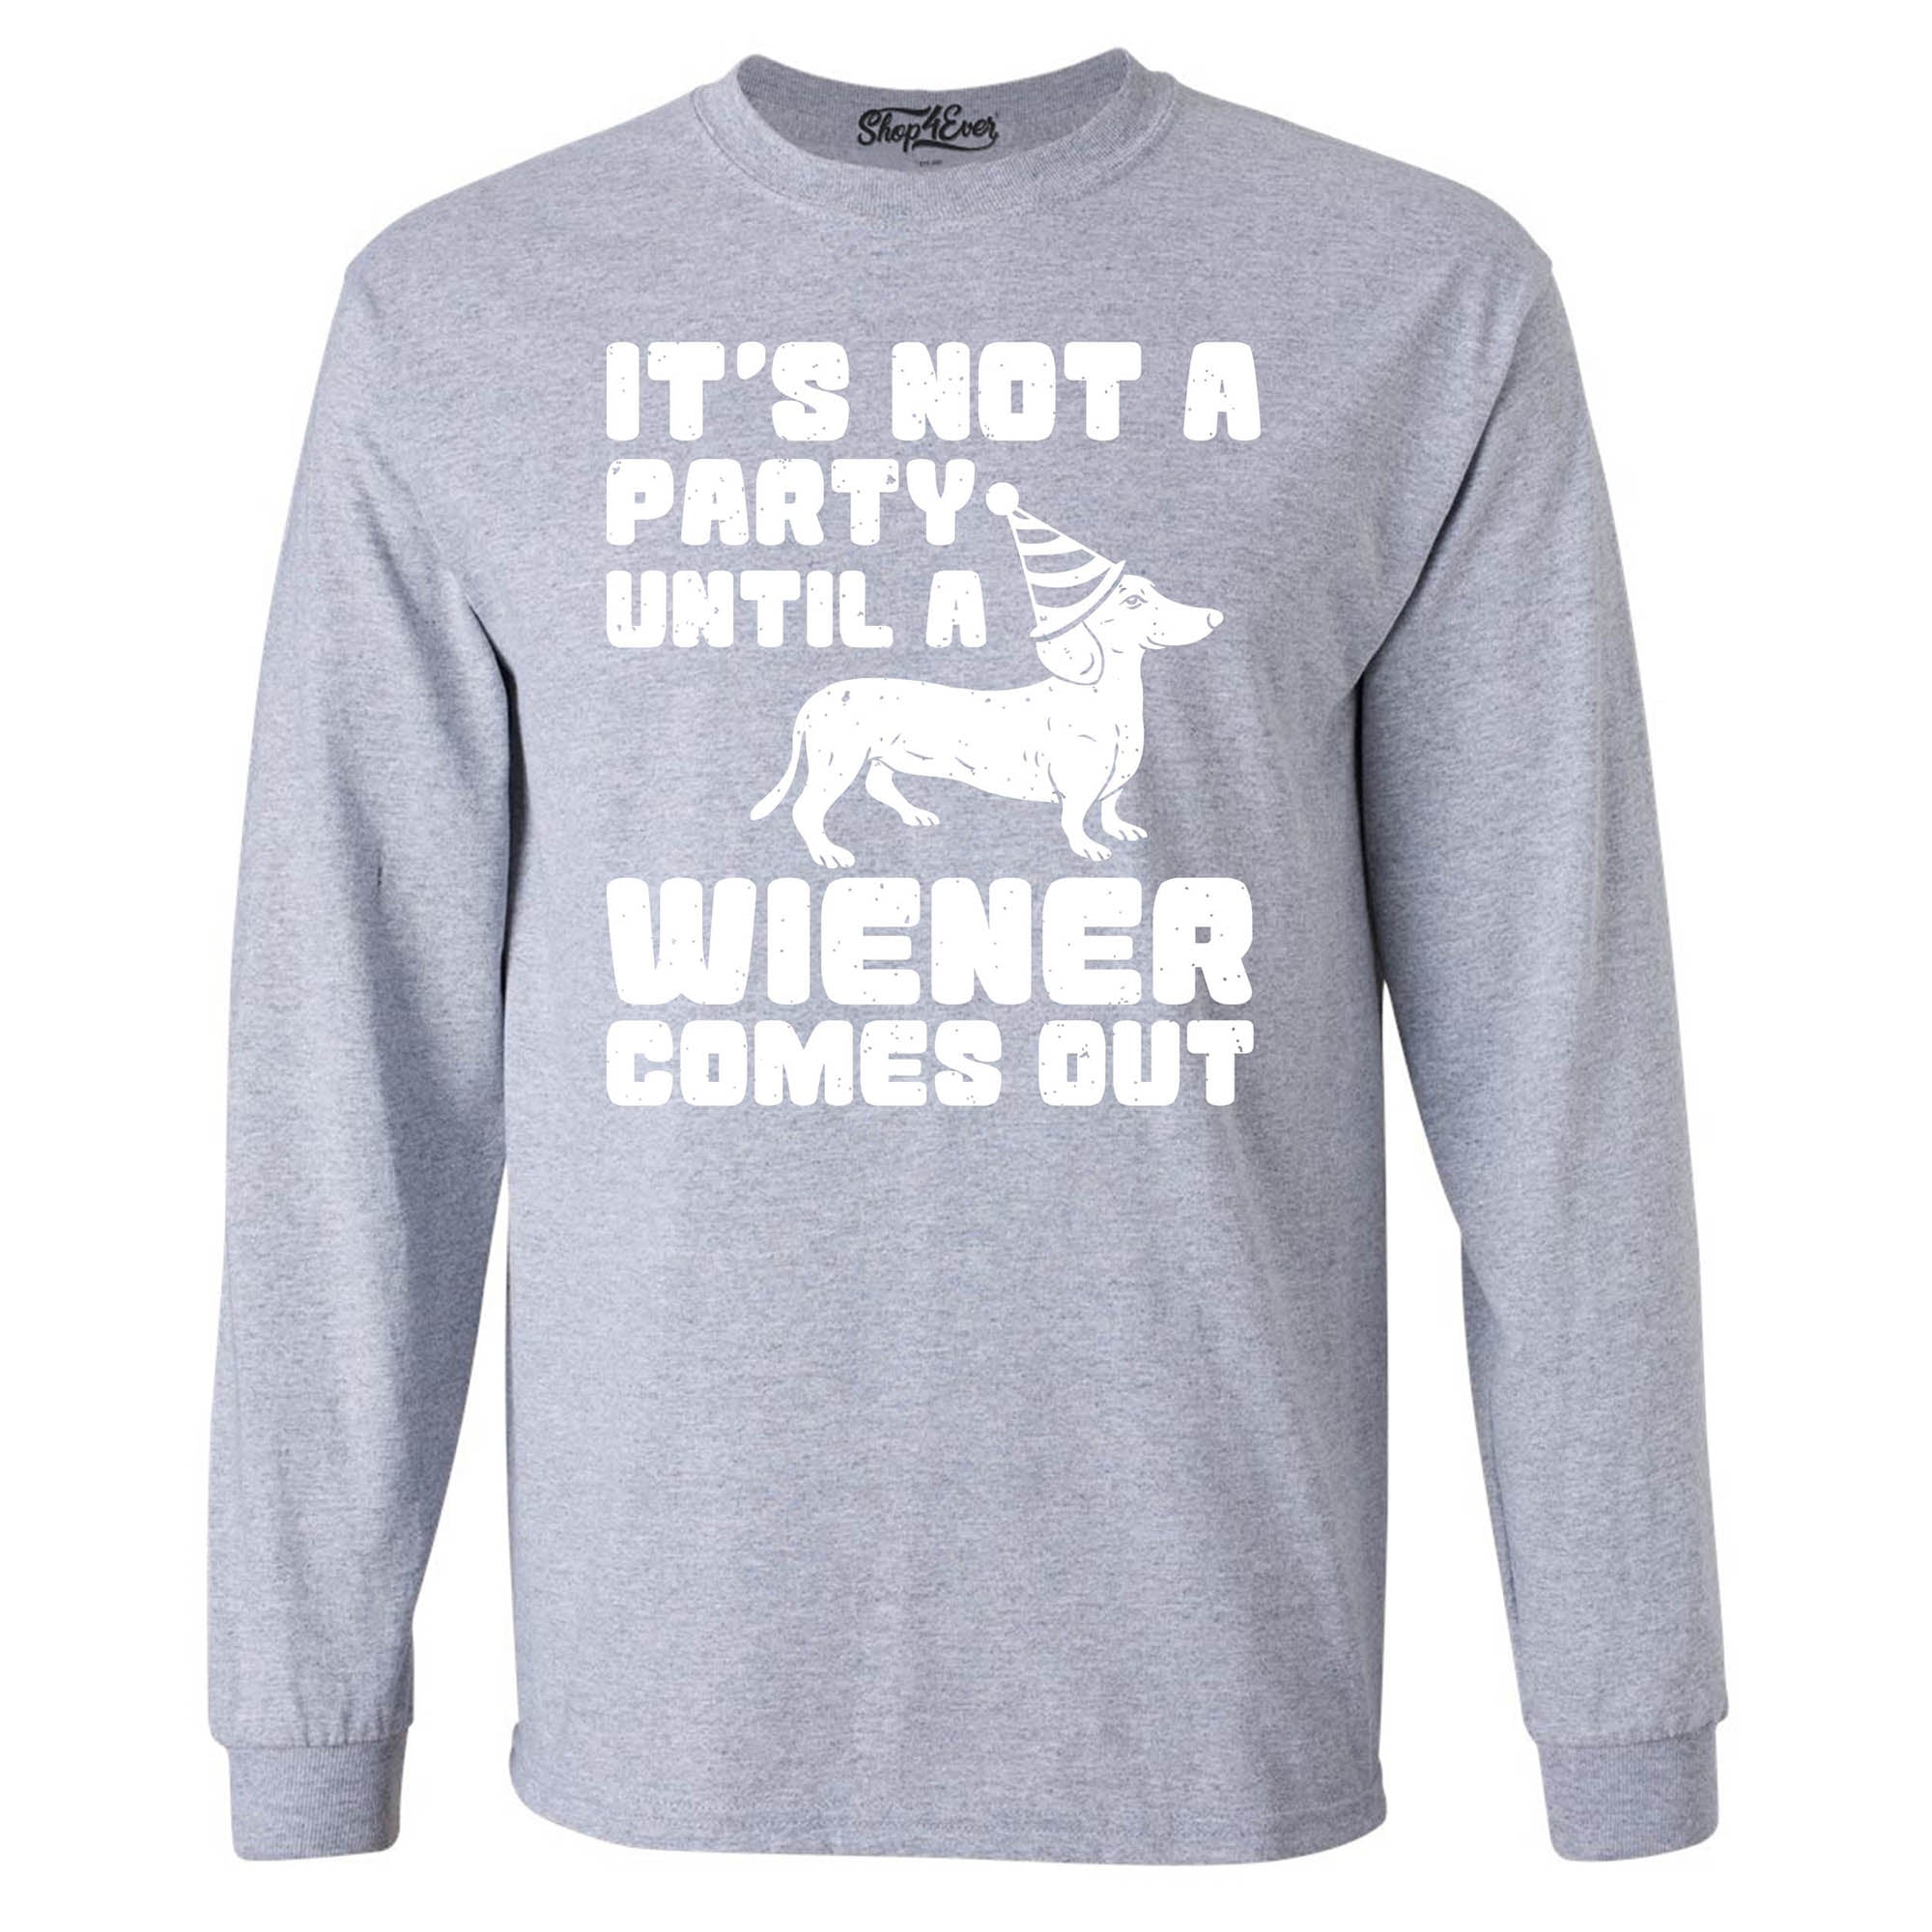 It's Not a Party Until The Wiener Comes Out Funny Dachshund Long Sleeve Shirt